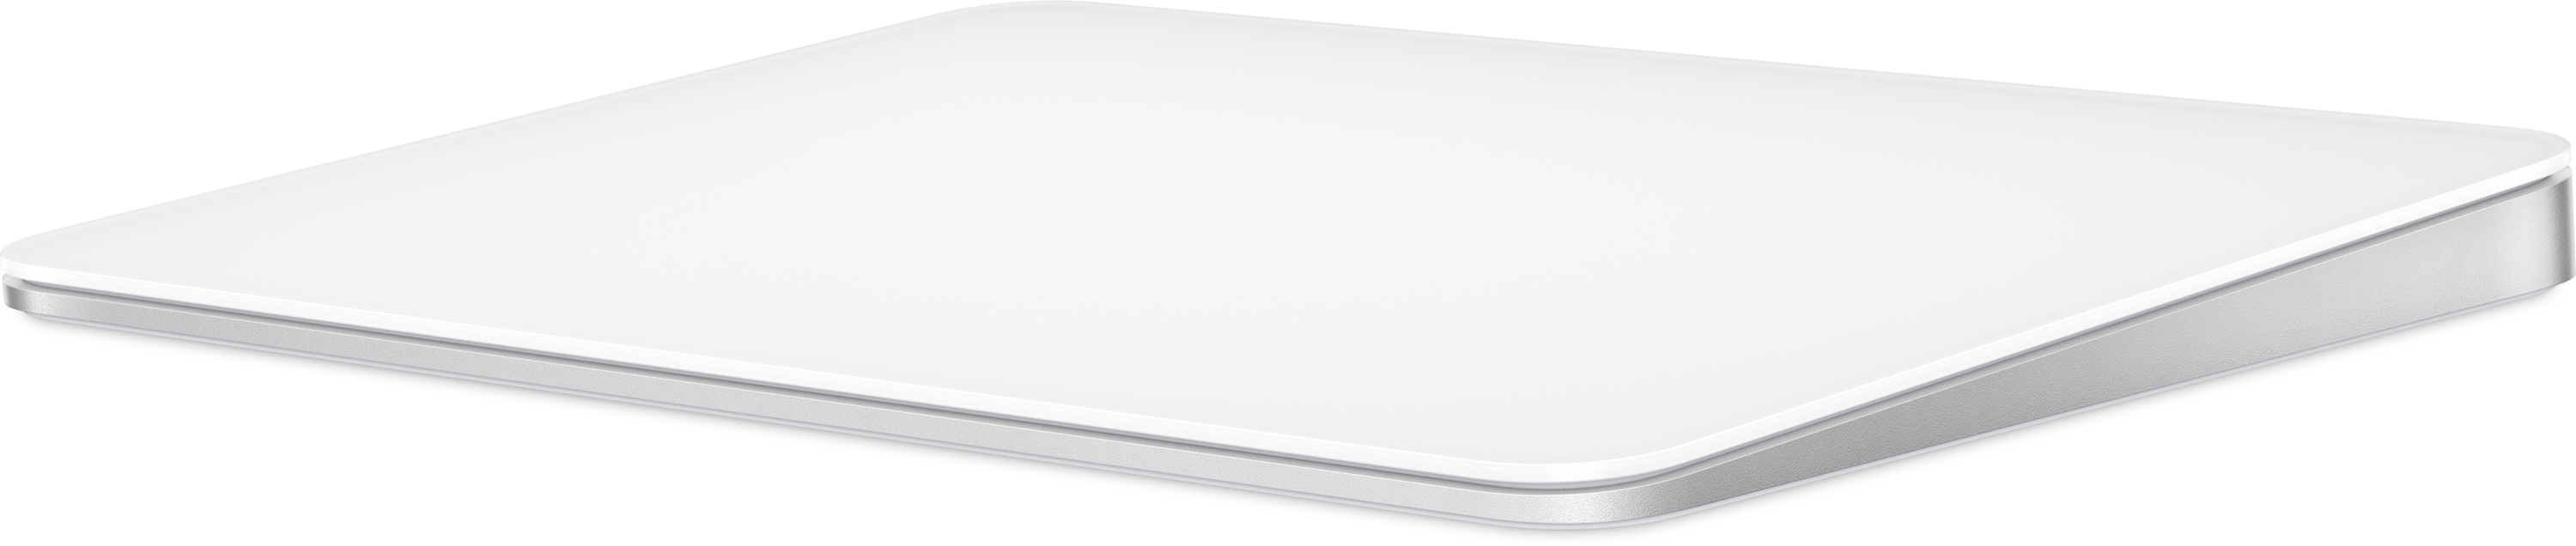 Apple Magic Trackpad with USB-C - Silver | Sweetwater